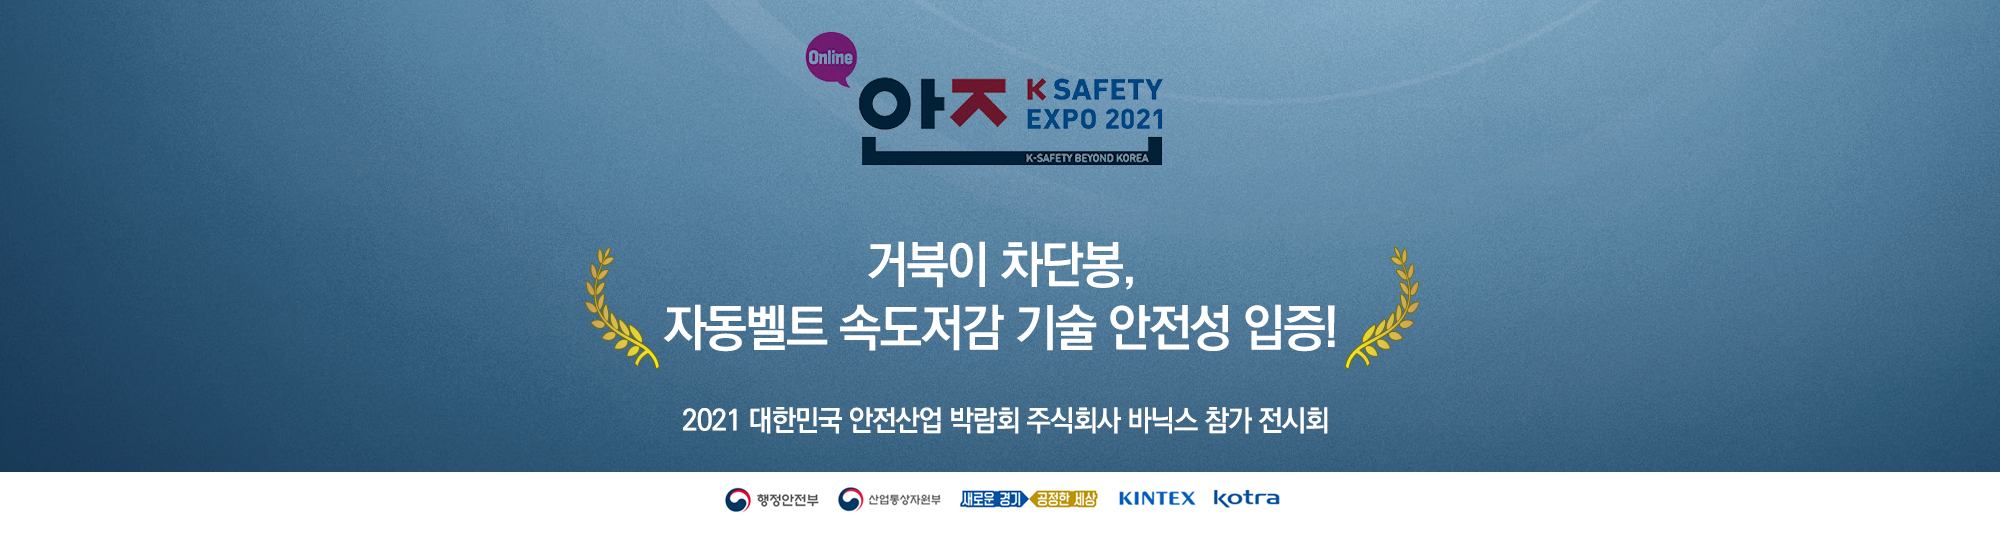 K-SAFETY EXPO 2021